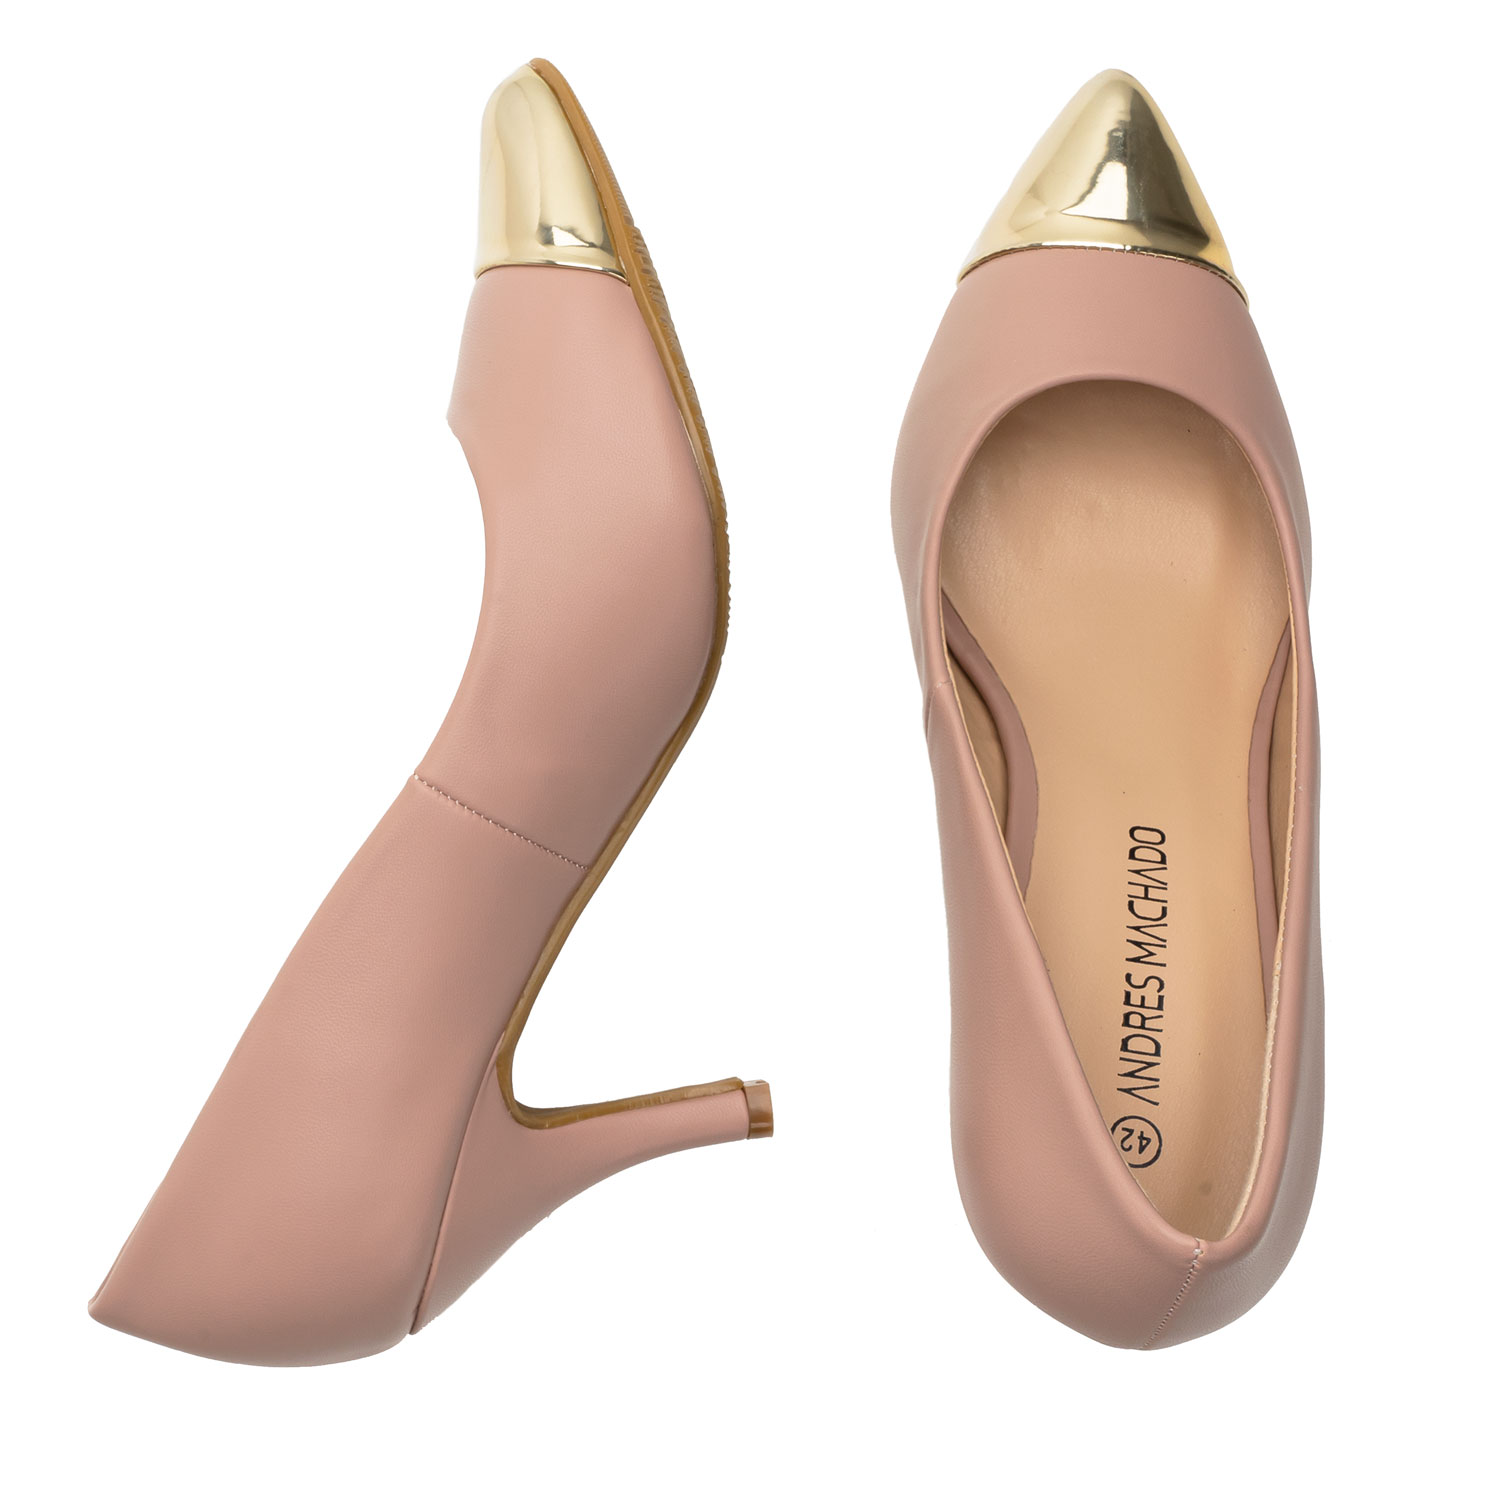 Stilettos in Nude Faux leather with Golden Toe Cap 